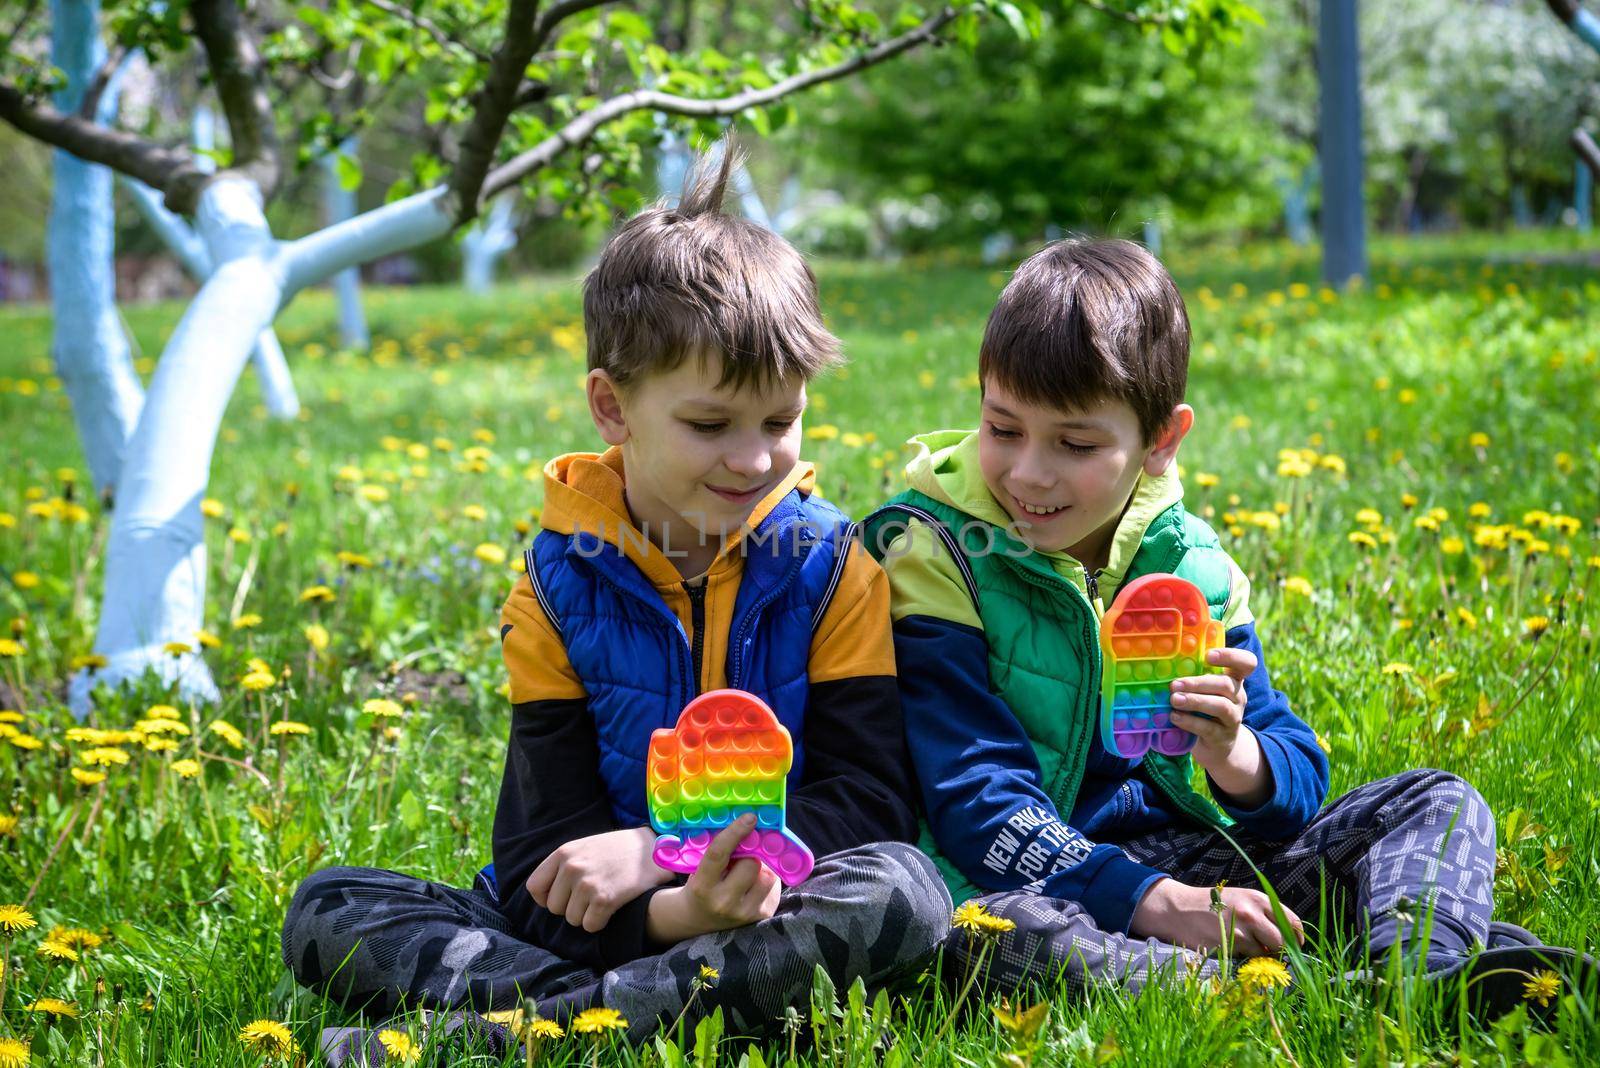 children playing with colorful toys Pop It. Boys on vacation. Tired of games, relaxing on the grass. Summer time for children, two boys friends at reboot together.